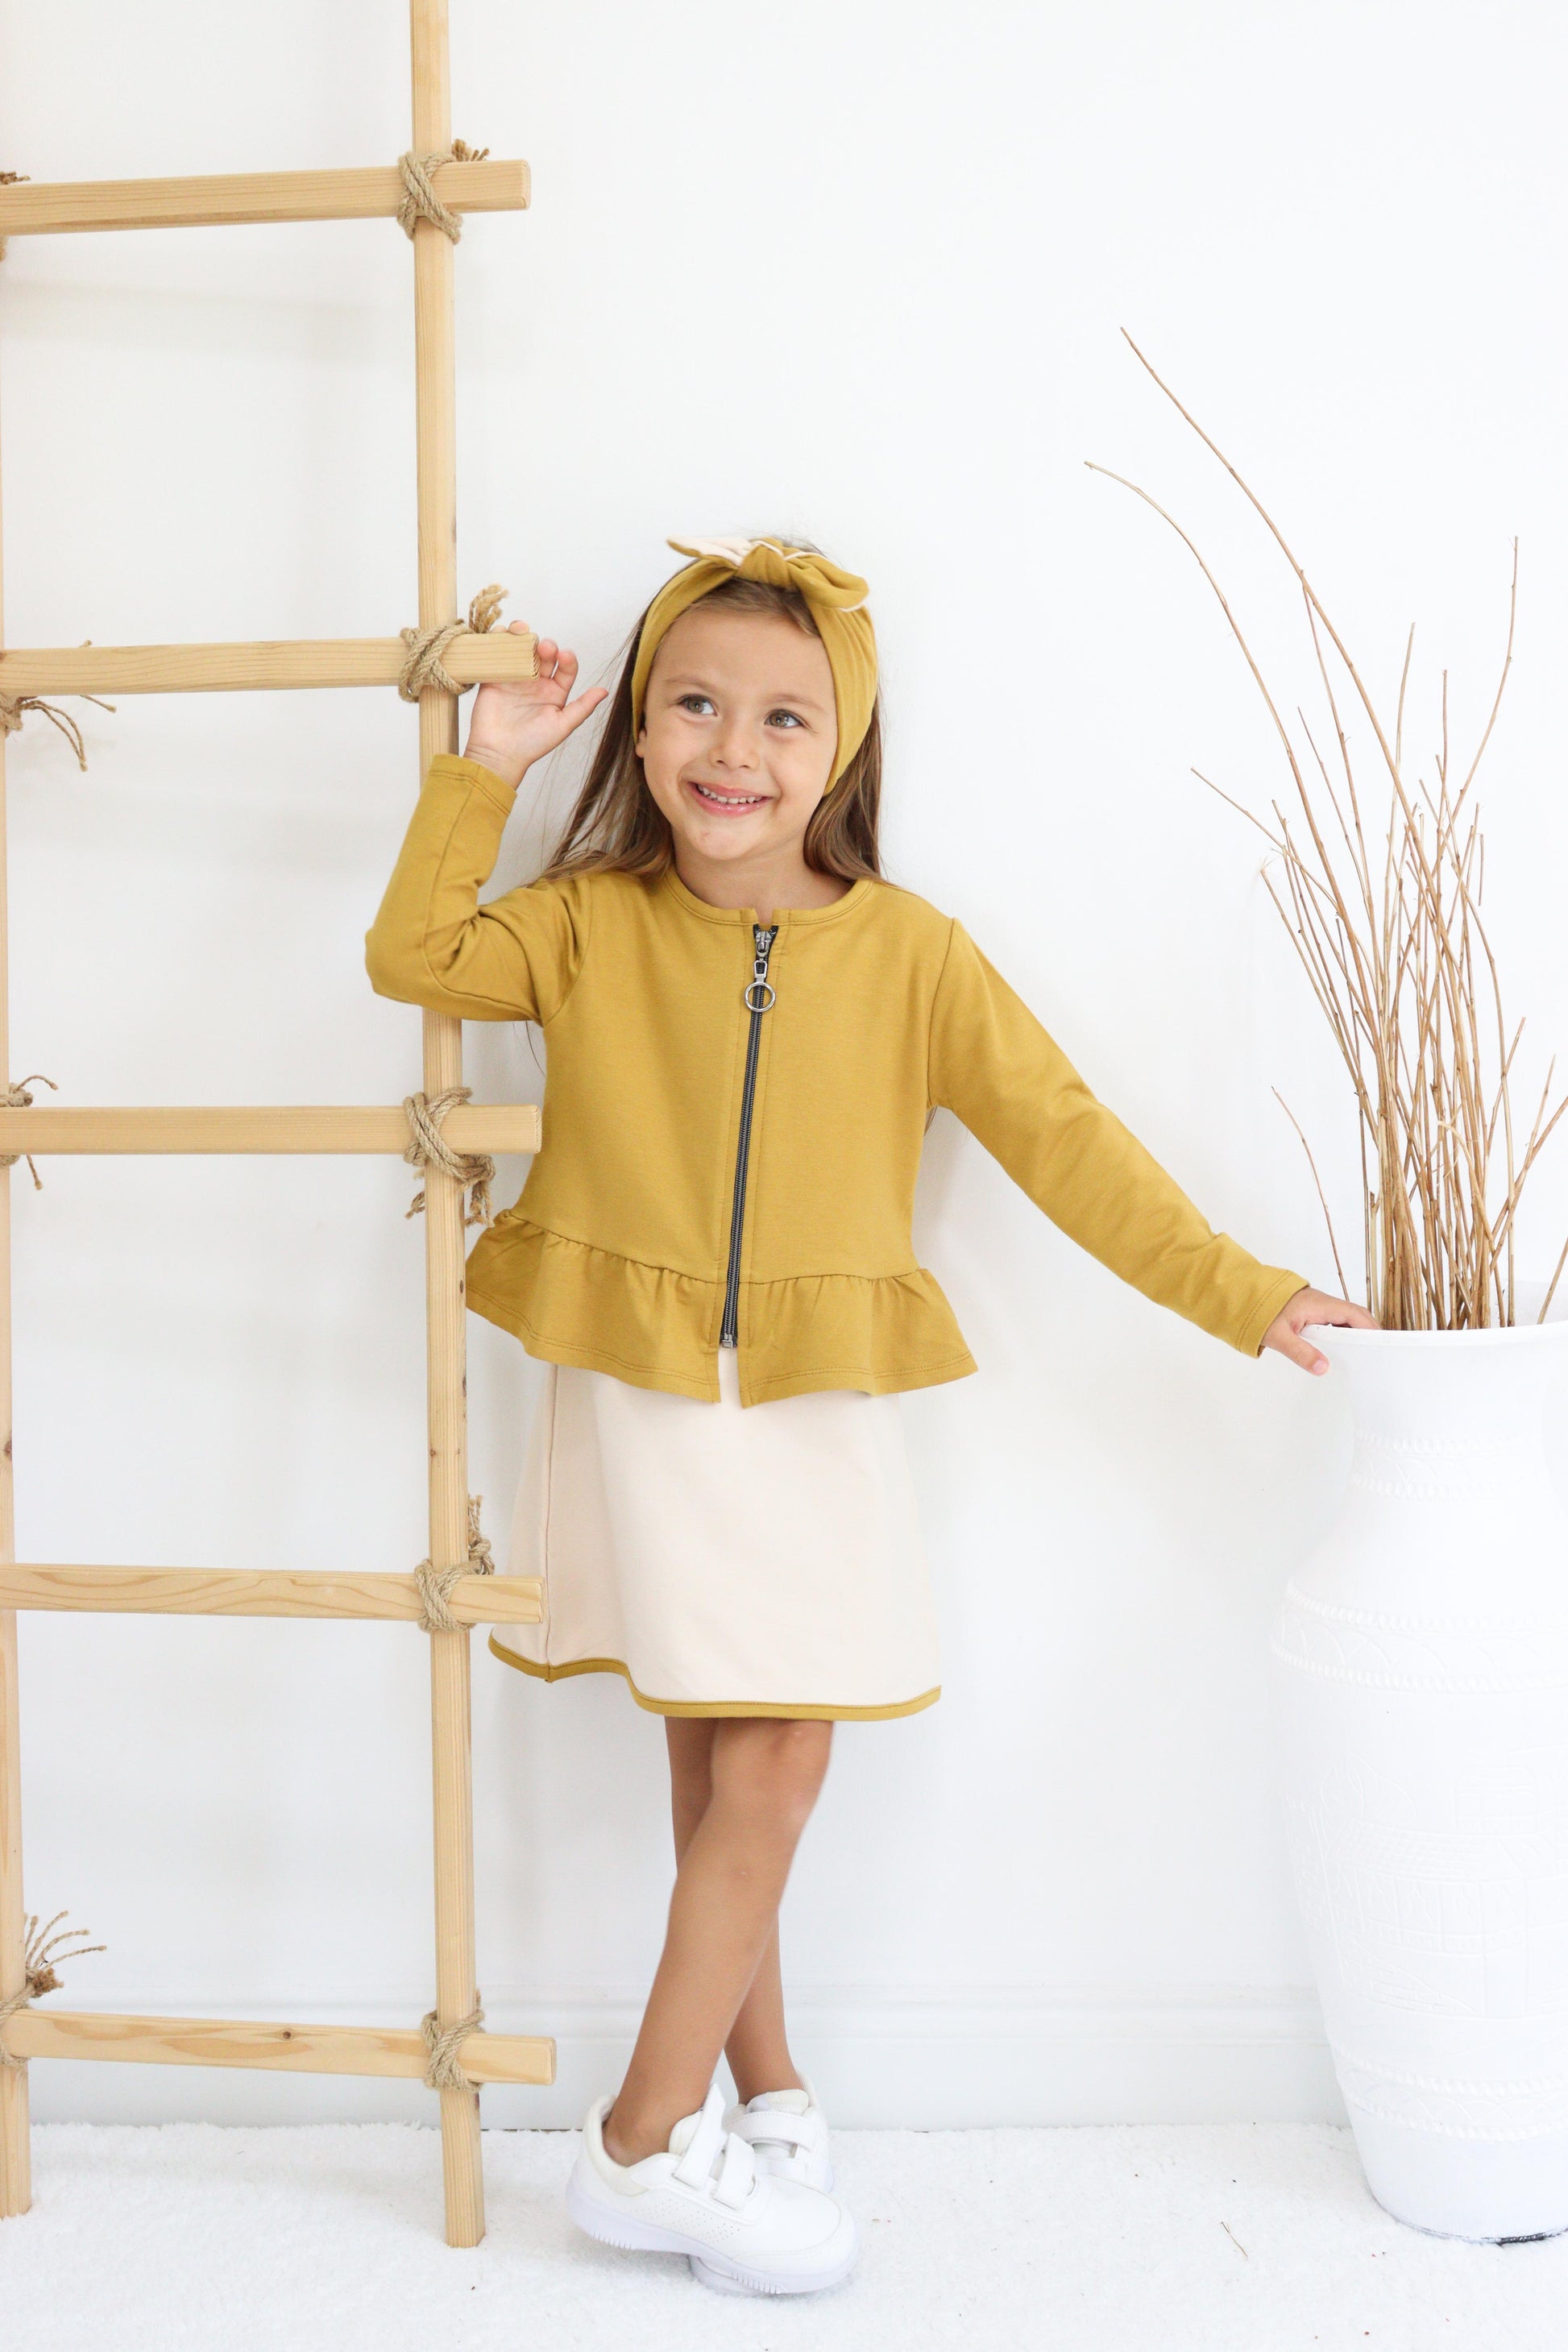 Kid's Front Heart Piece Detailed Dress -Cardier Suit and HeadbandChildren's Dress and Cardigan Set